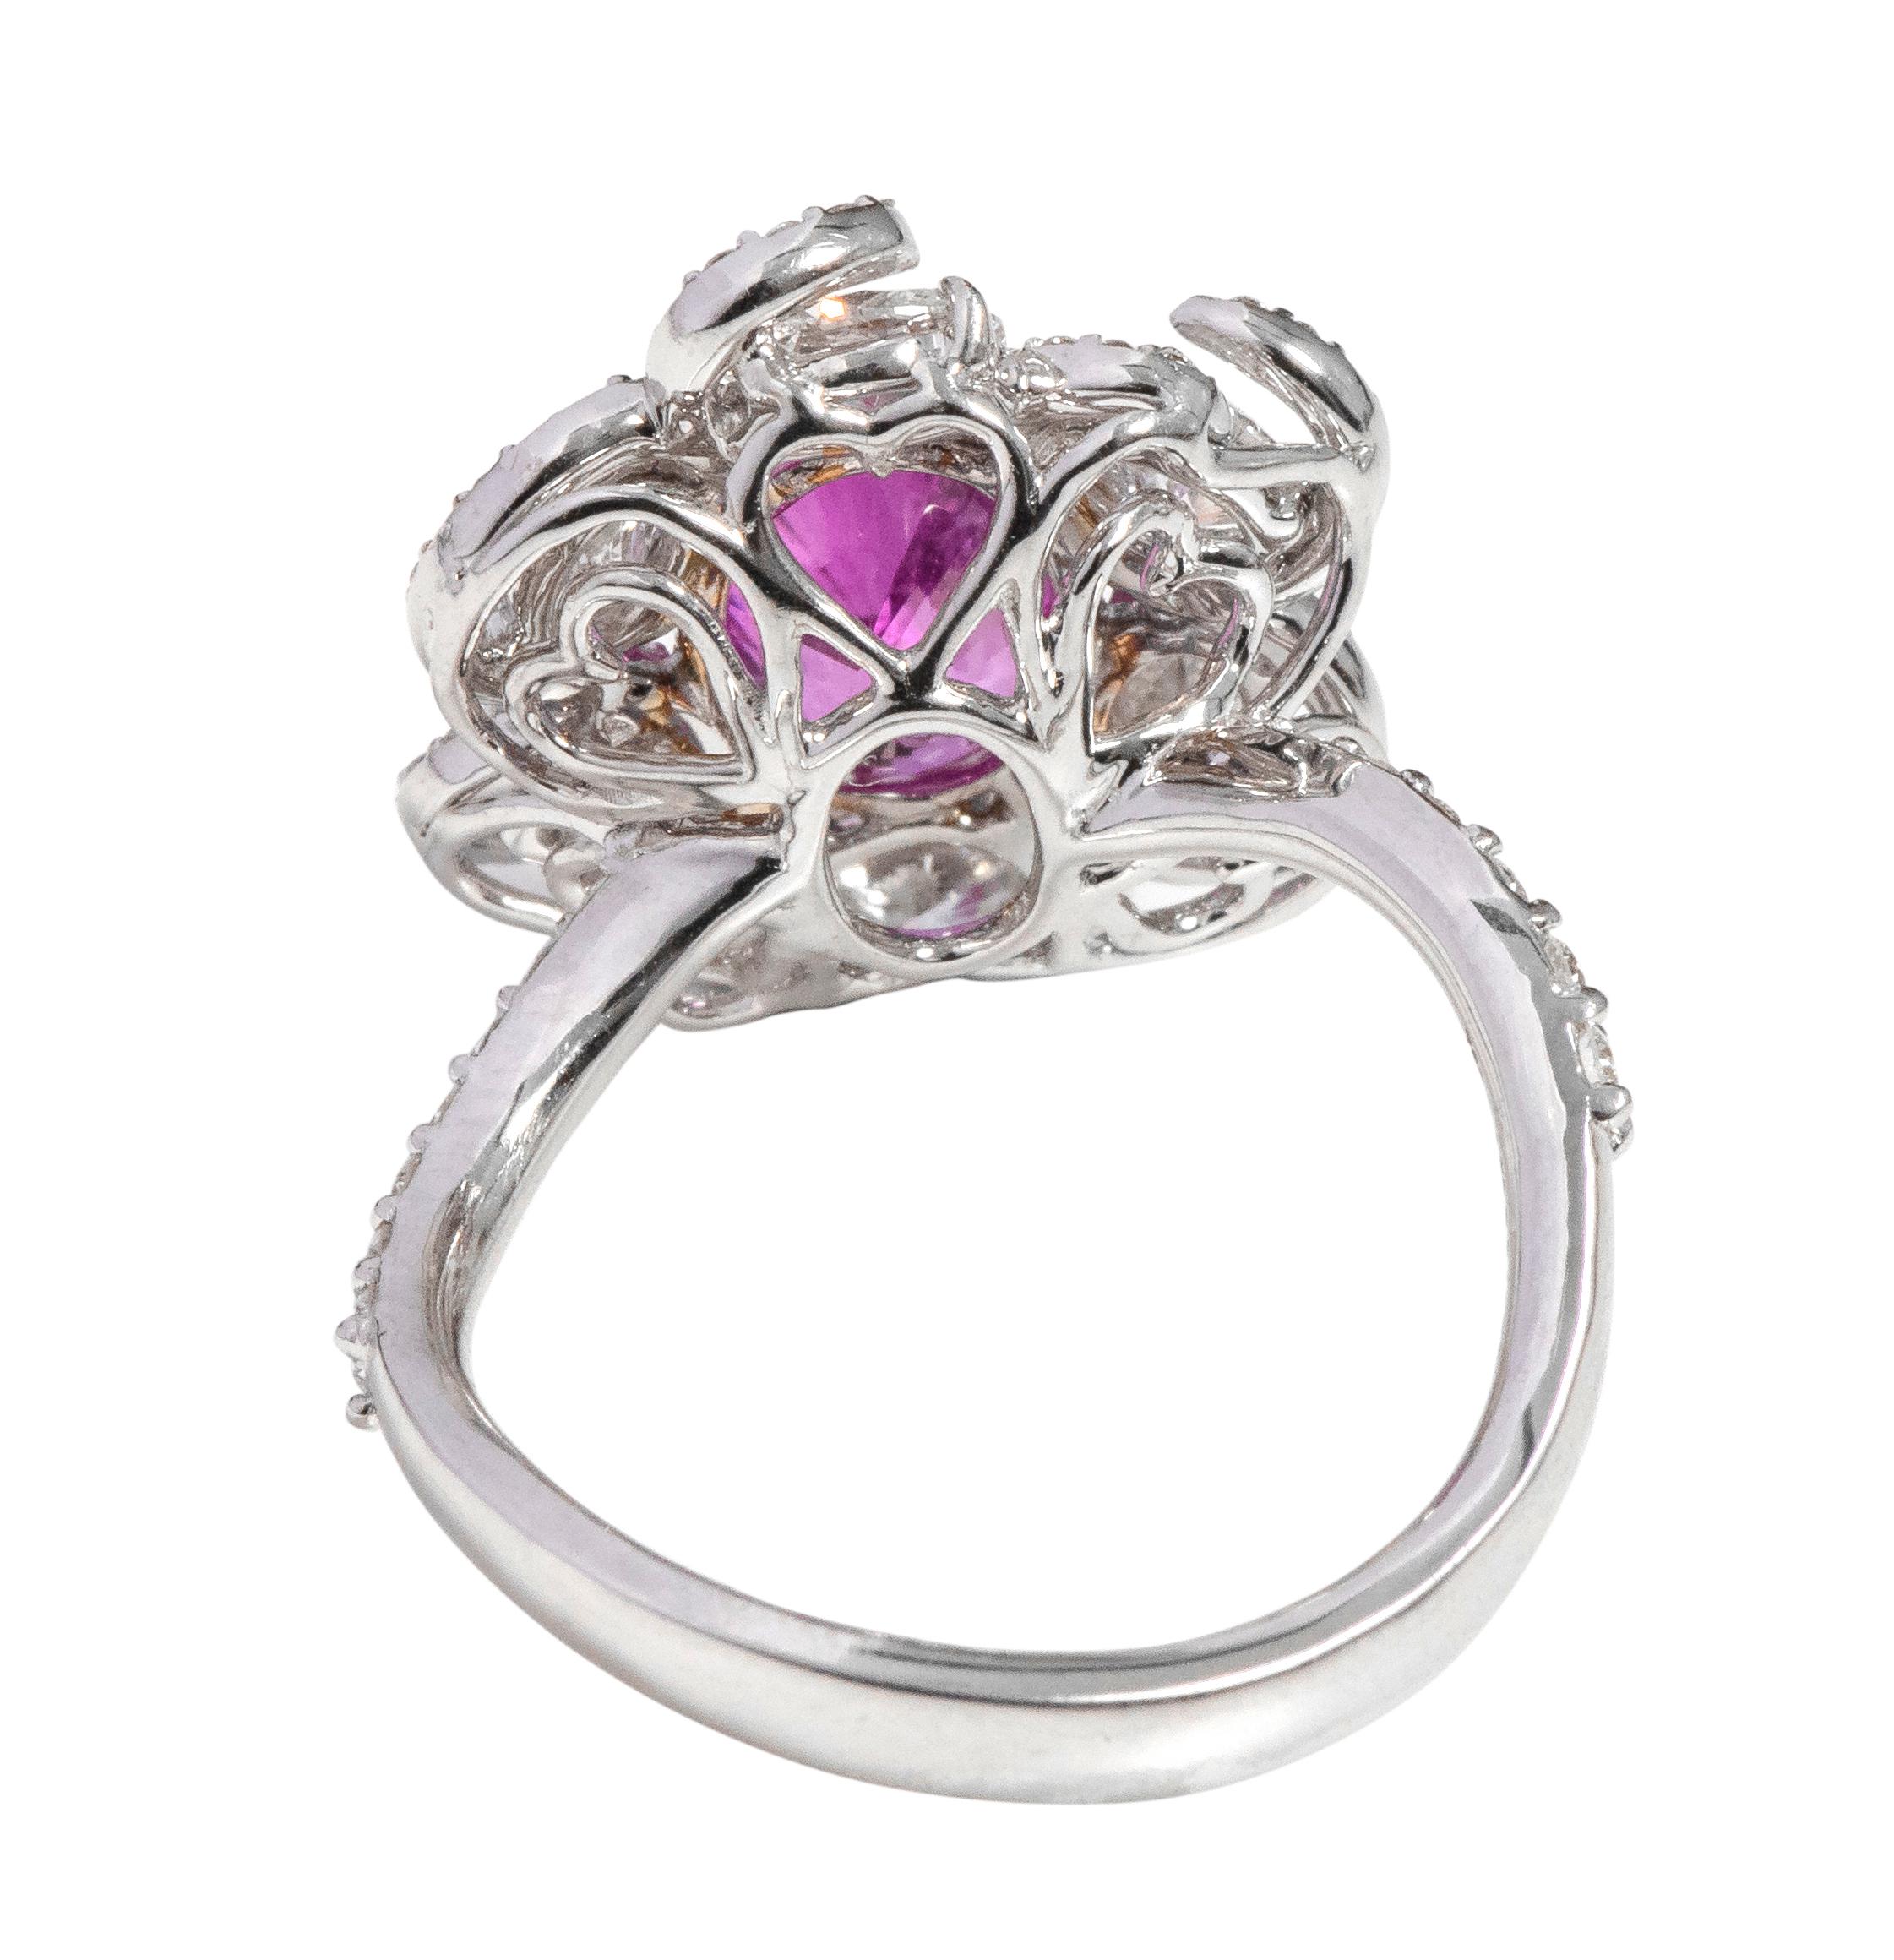 18 Karat White Gold 3.14 Carat Solitaire Pink-Sapphire and Diamond Cocktail Ring For Sale 1